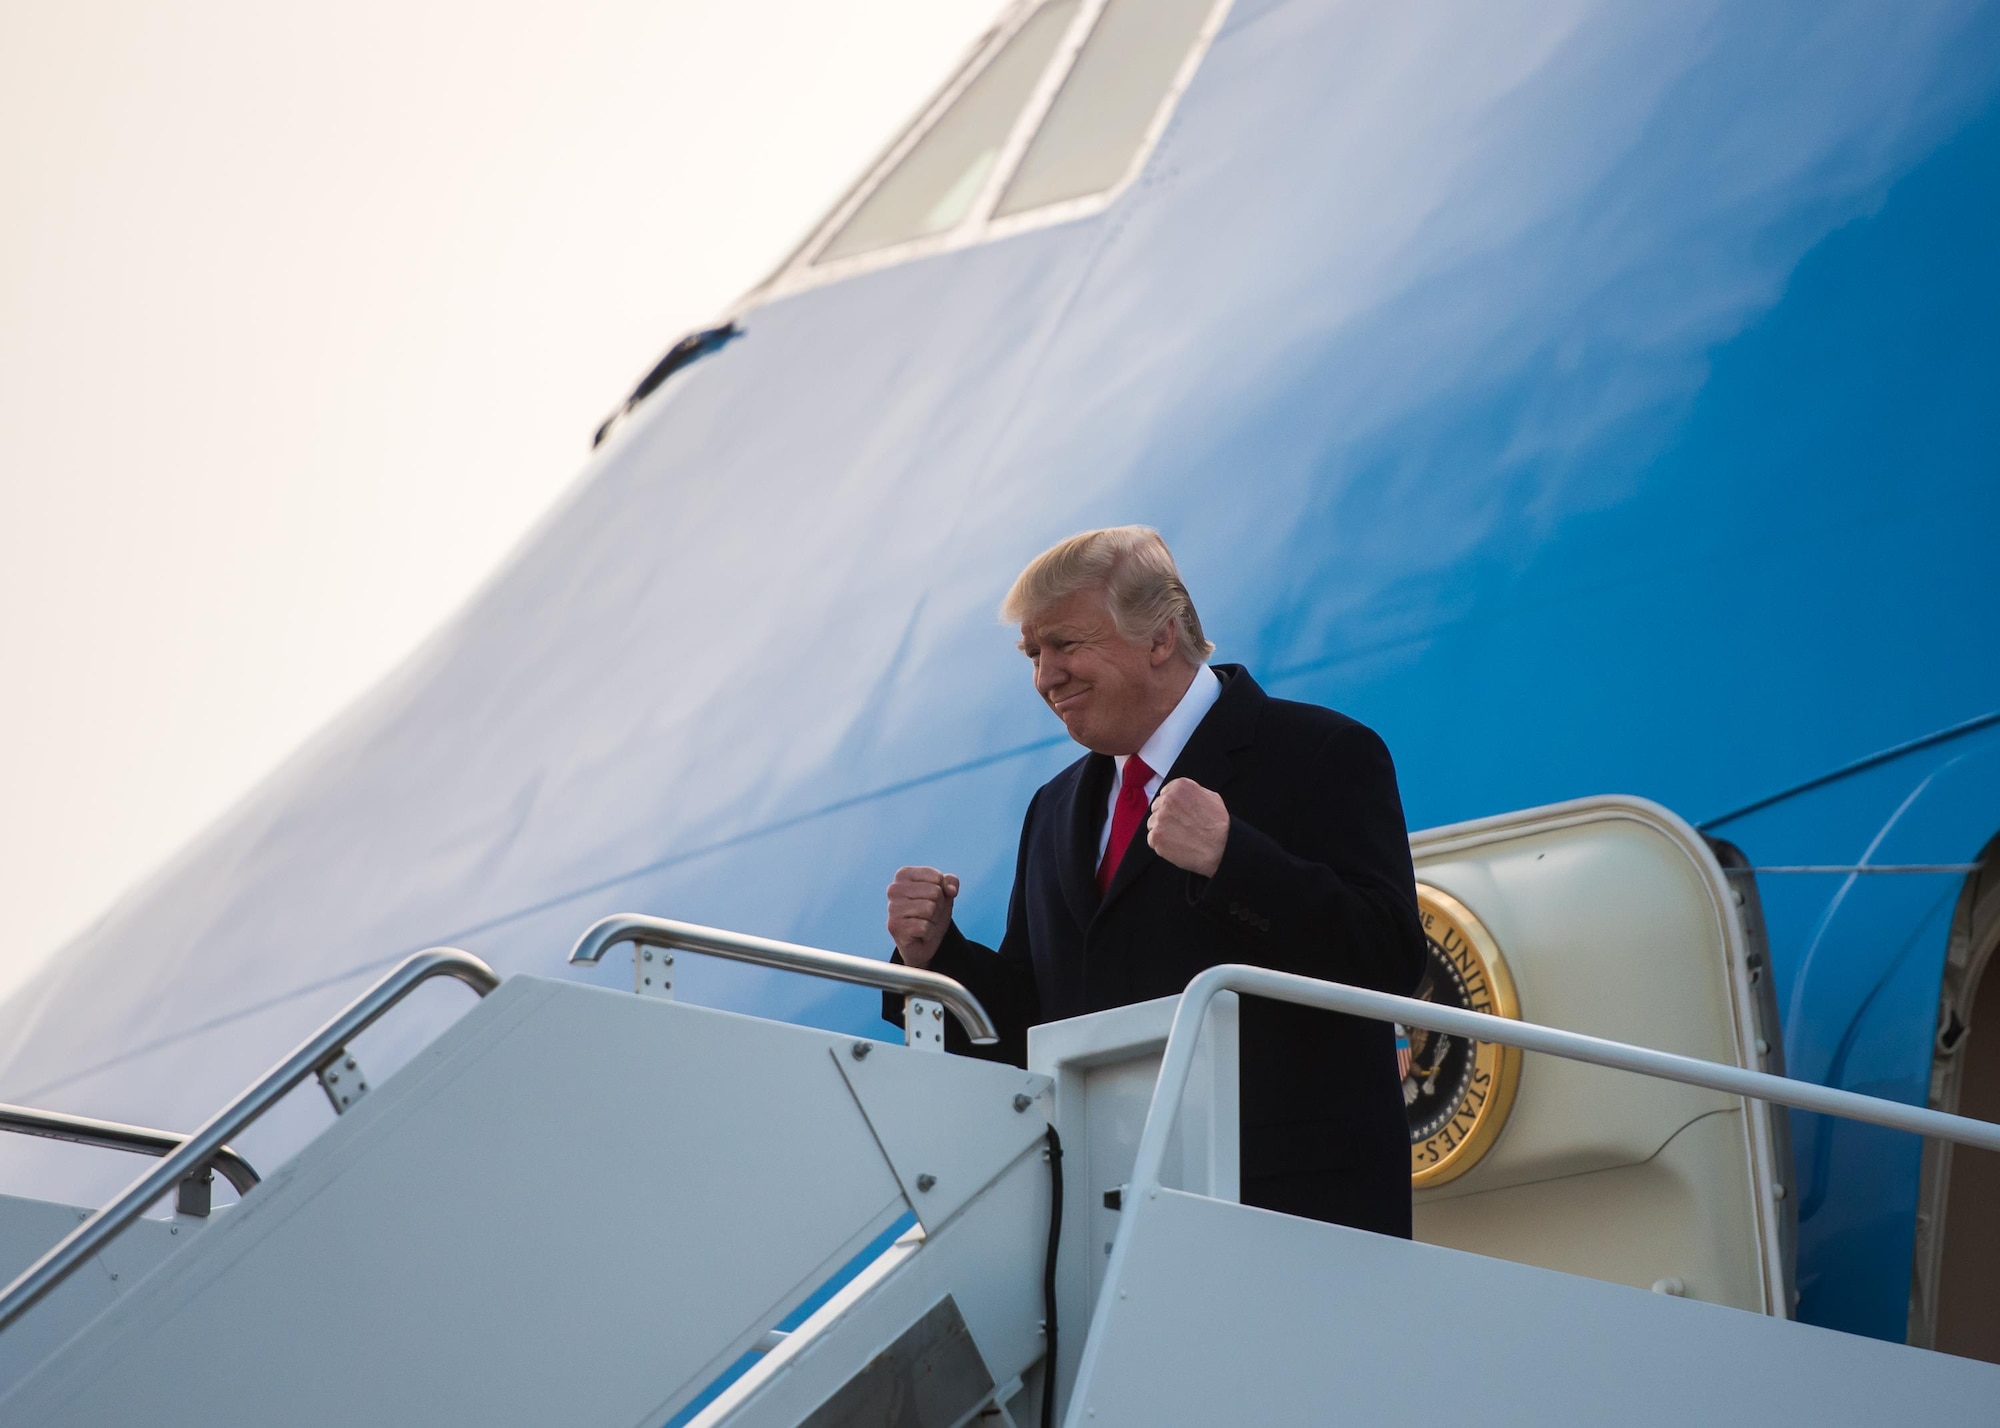 President Donald Trump exits Air Force One at the Kentucky Air National Guard Base in Louisville, Ky., March 20, 2017. Trump was in Louisville to attend a rally at the Kentucky Exposition Center. (U.S. Air National Guard photo by Master Sgt. Phil Speck)